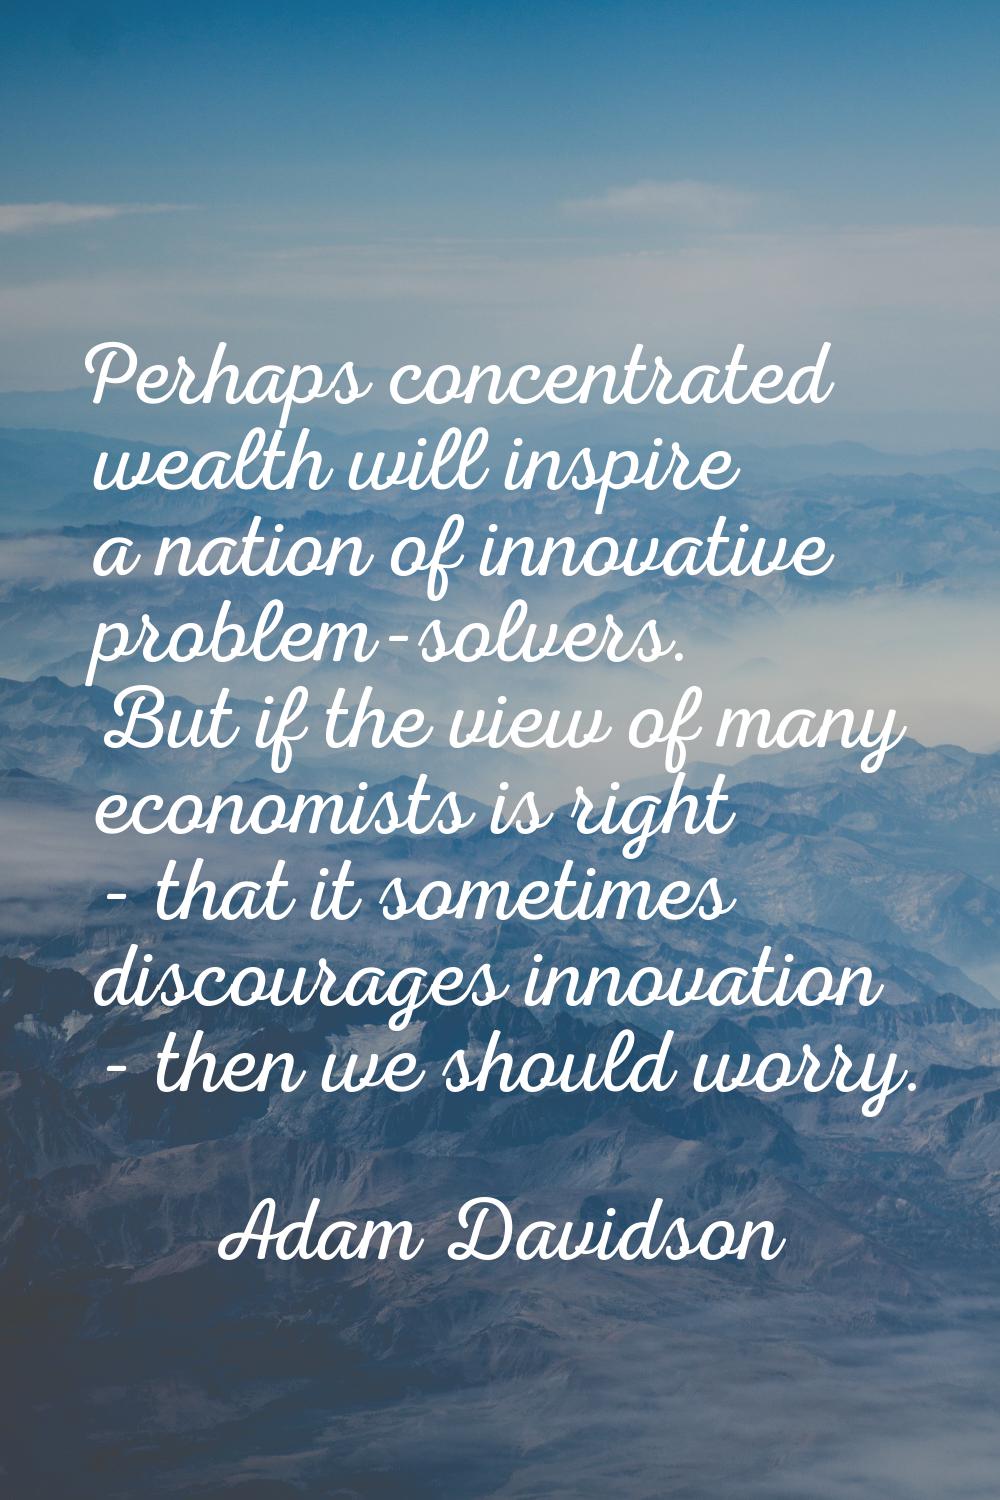 Perhaps concentrated wealth will inspire a nation of innovative problem-solvers. But if the view of